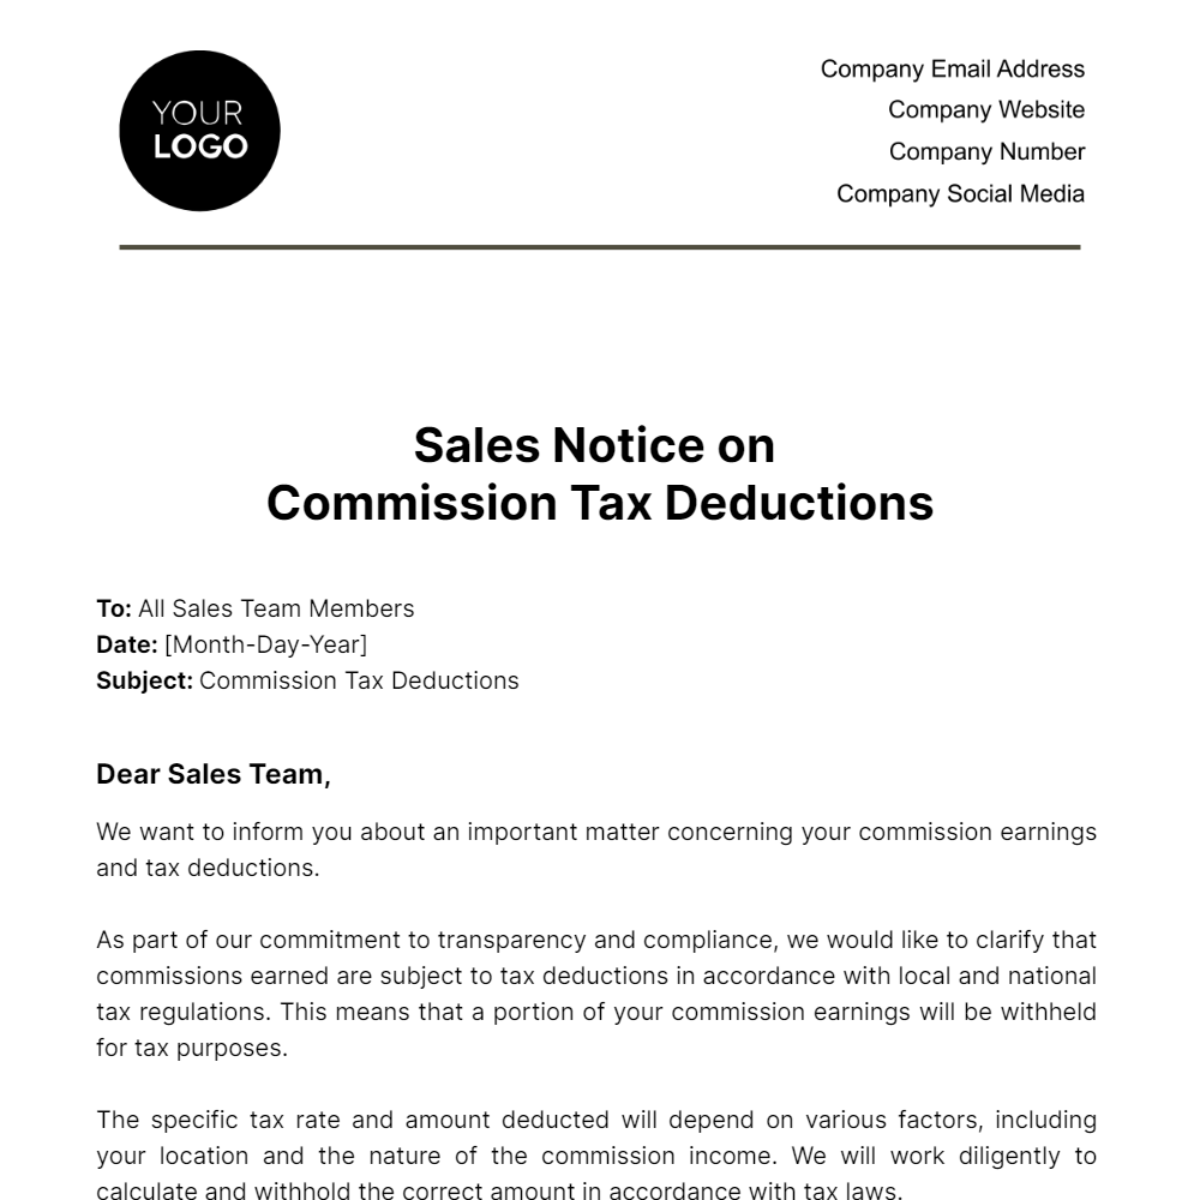 Sales Notice on Commission Tax Deductions Template